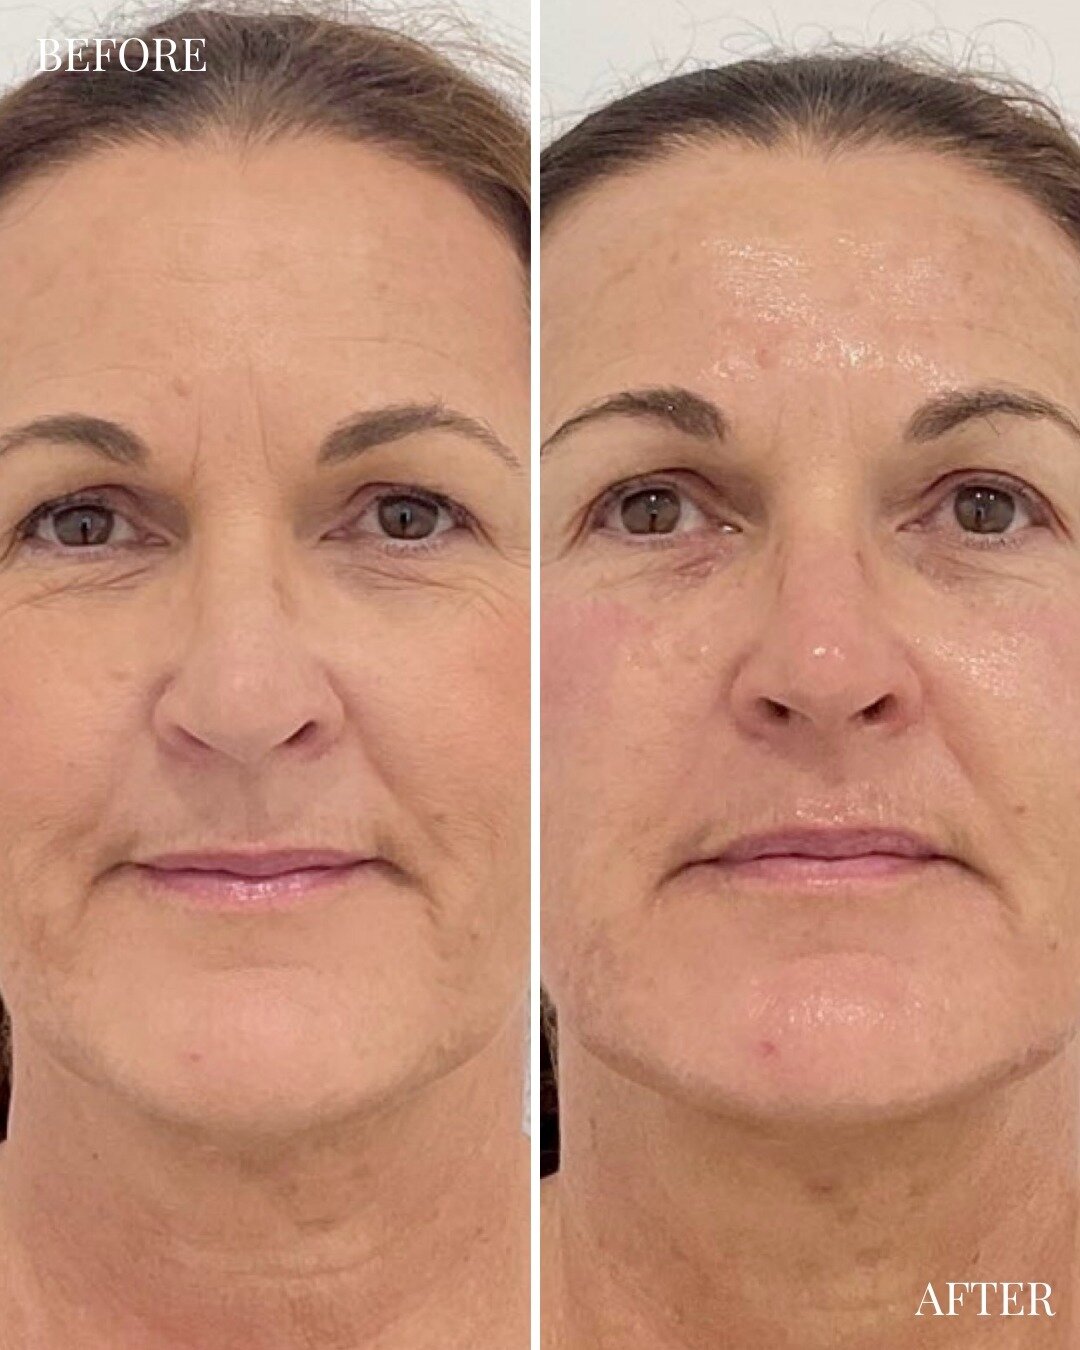 We love a before &amp; after 🤍 

Our NOTOX facial is a non-toxic, non-invasive, non-injectable facelift that achieves a lifted, contoured and rejuvenated appearance. No pain, no worries!

Send us a DM to find out all the details!

#shapeofyou #bodyc